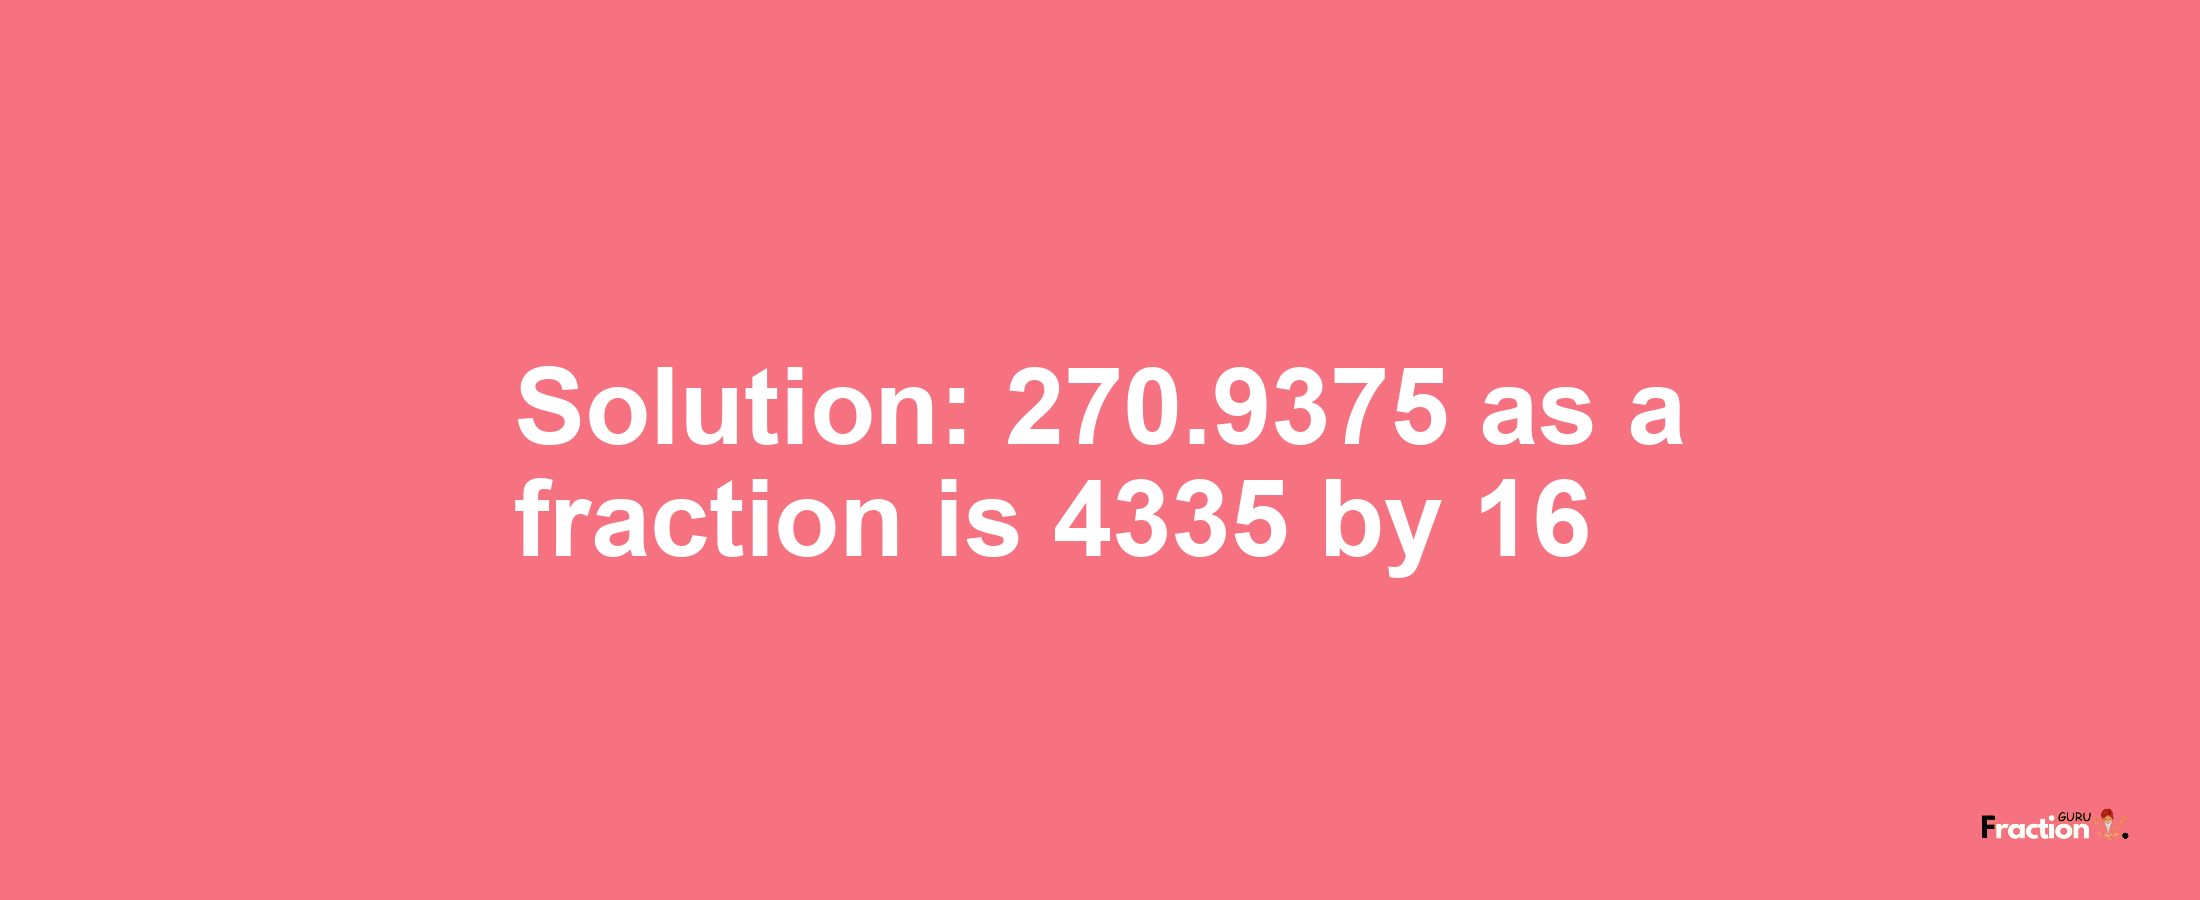 Solution:270.9375 as a fraction is 4335/16